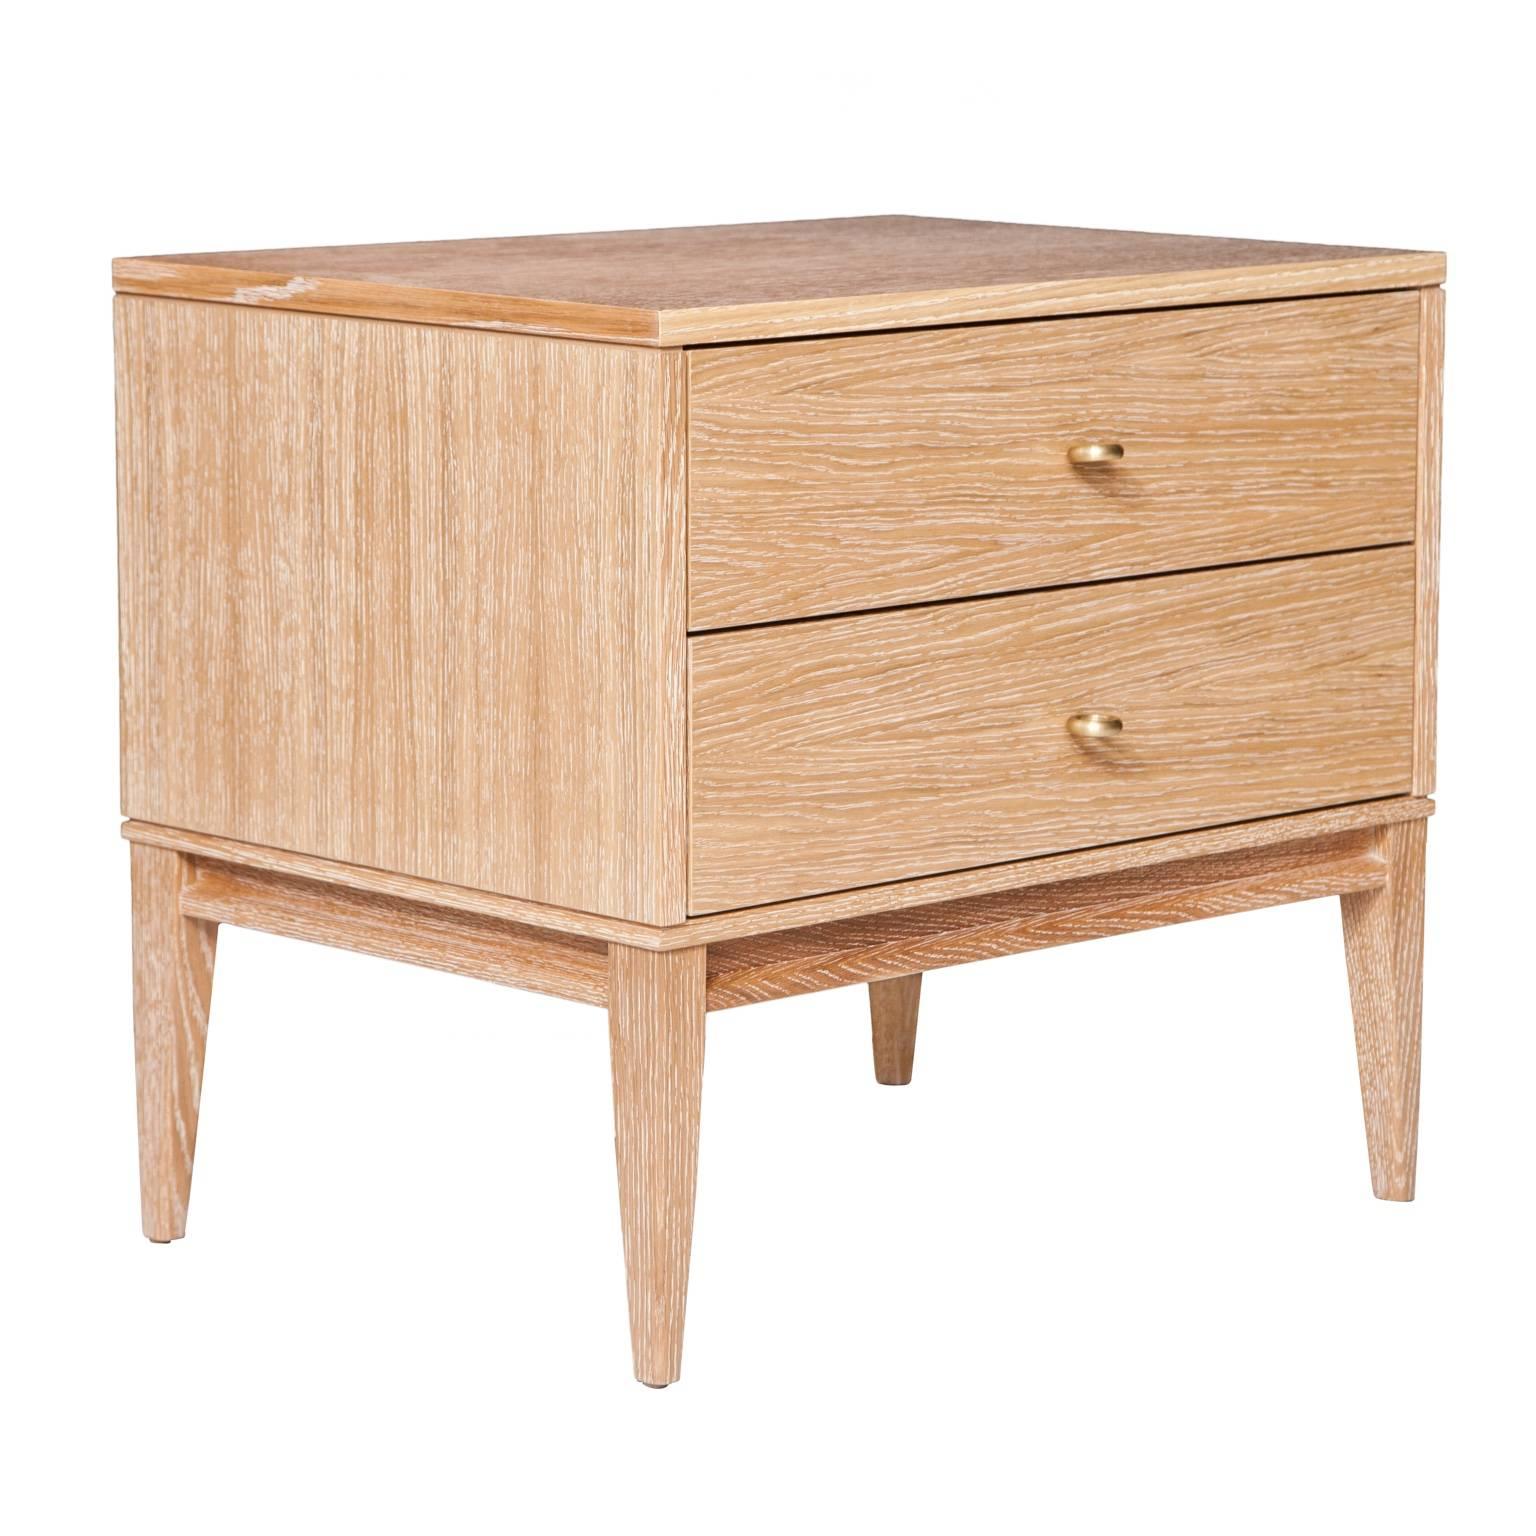 Contemporary Vasily Nightstands For Sale